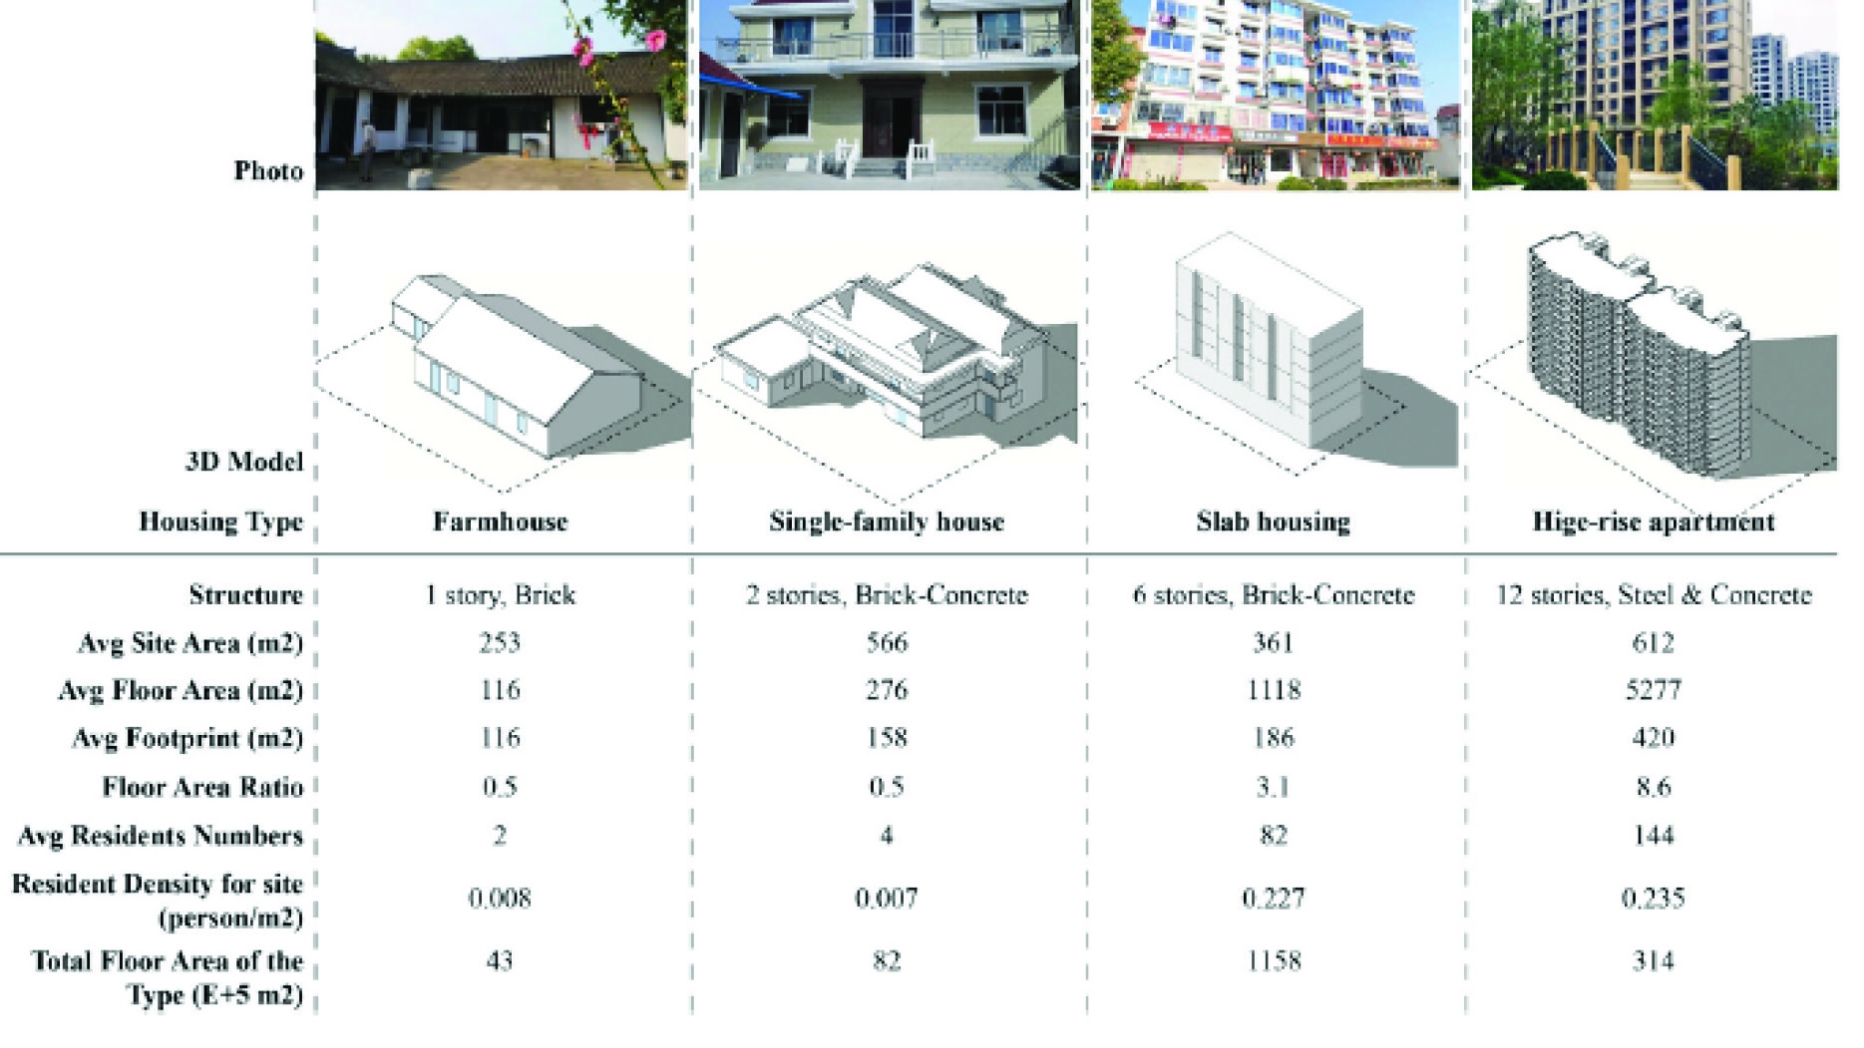 Table of diagrams of housing types